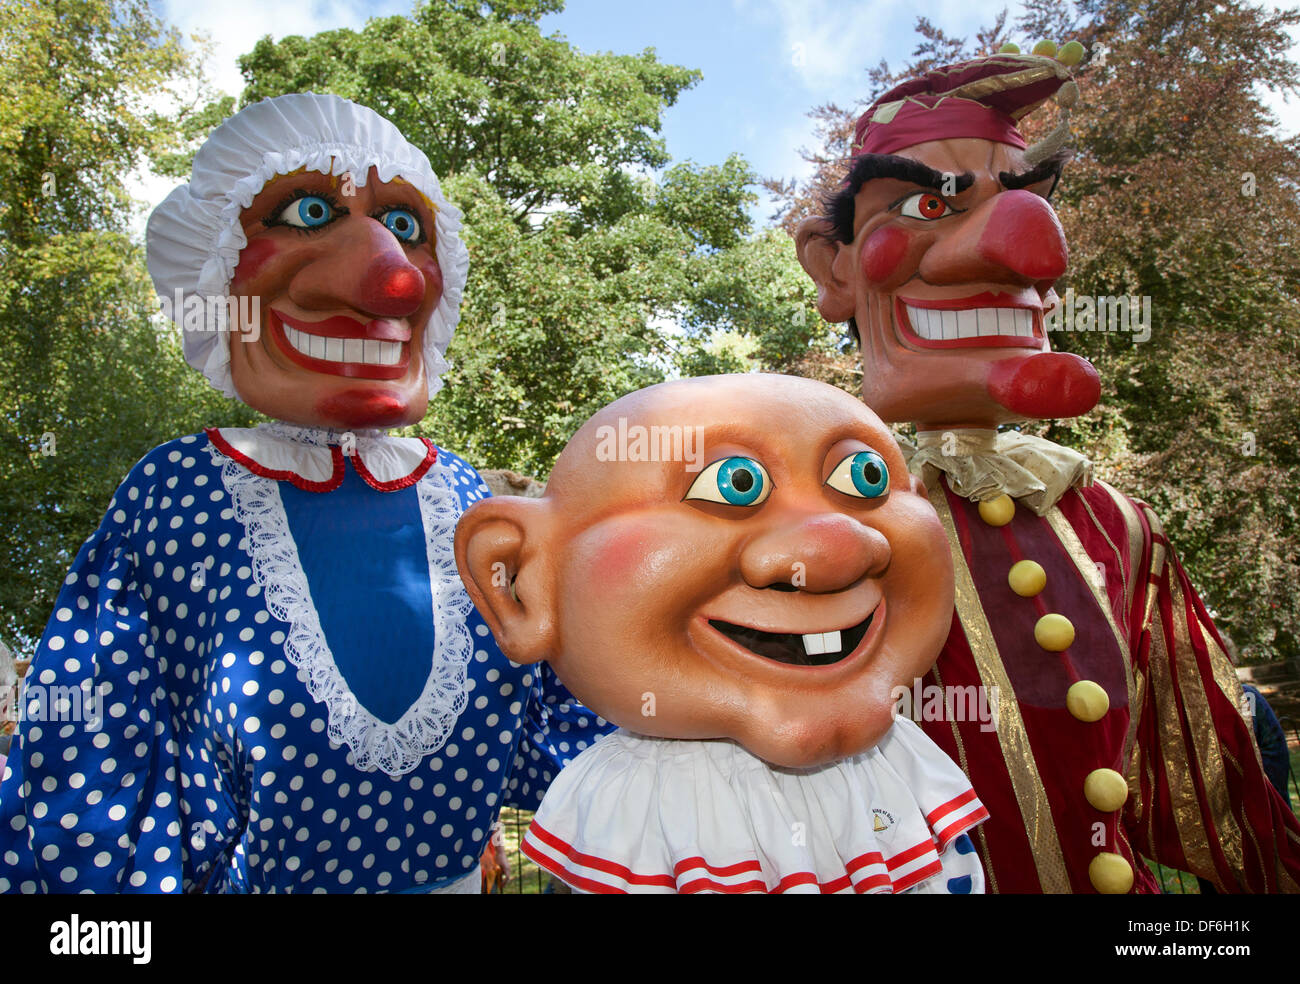 Skipton UK. 29th September, 2013. International Puppet Festival.  Giant scary Punch & Judy Puppets at Skipton's biennial international puppet festival featuring theatre companies from all over Europe with giant puppets animated with hands, feet, toys,  shadows and with a puppet show, punch, performance, theatre stage entertainment, children, traditional, clown, fun, play, judy, red, sign, doll, funny, colourful, event, summer, jester, puppets, sky, wooden giants. Stock Photo